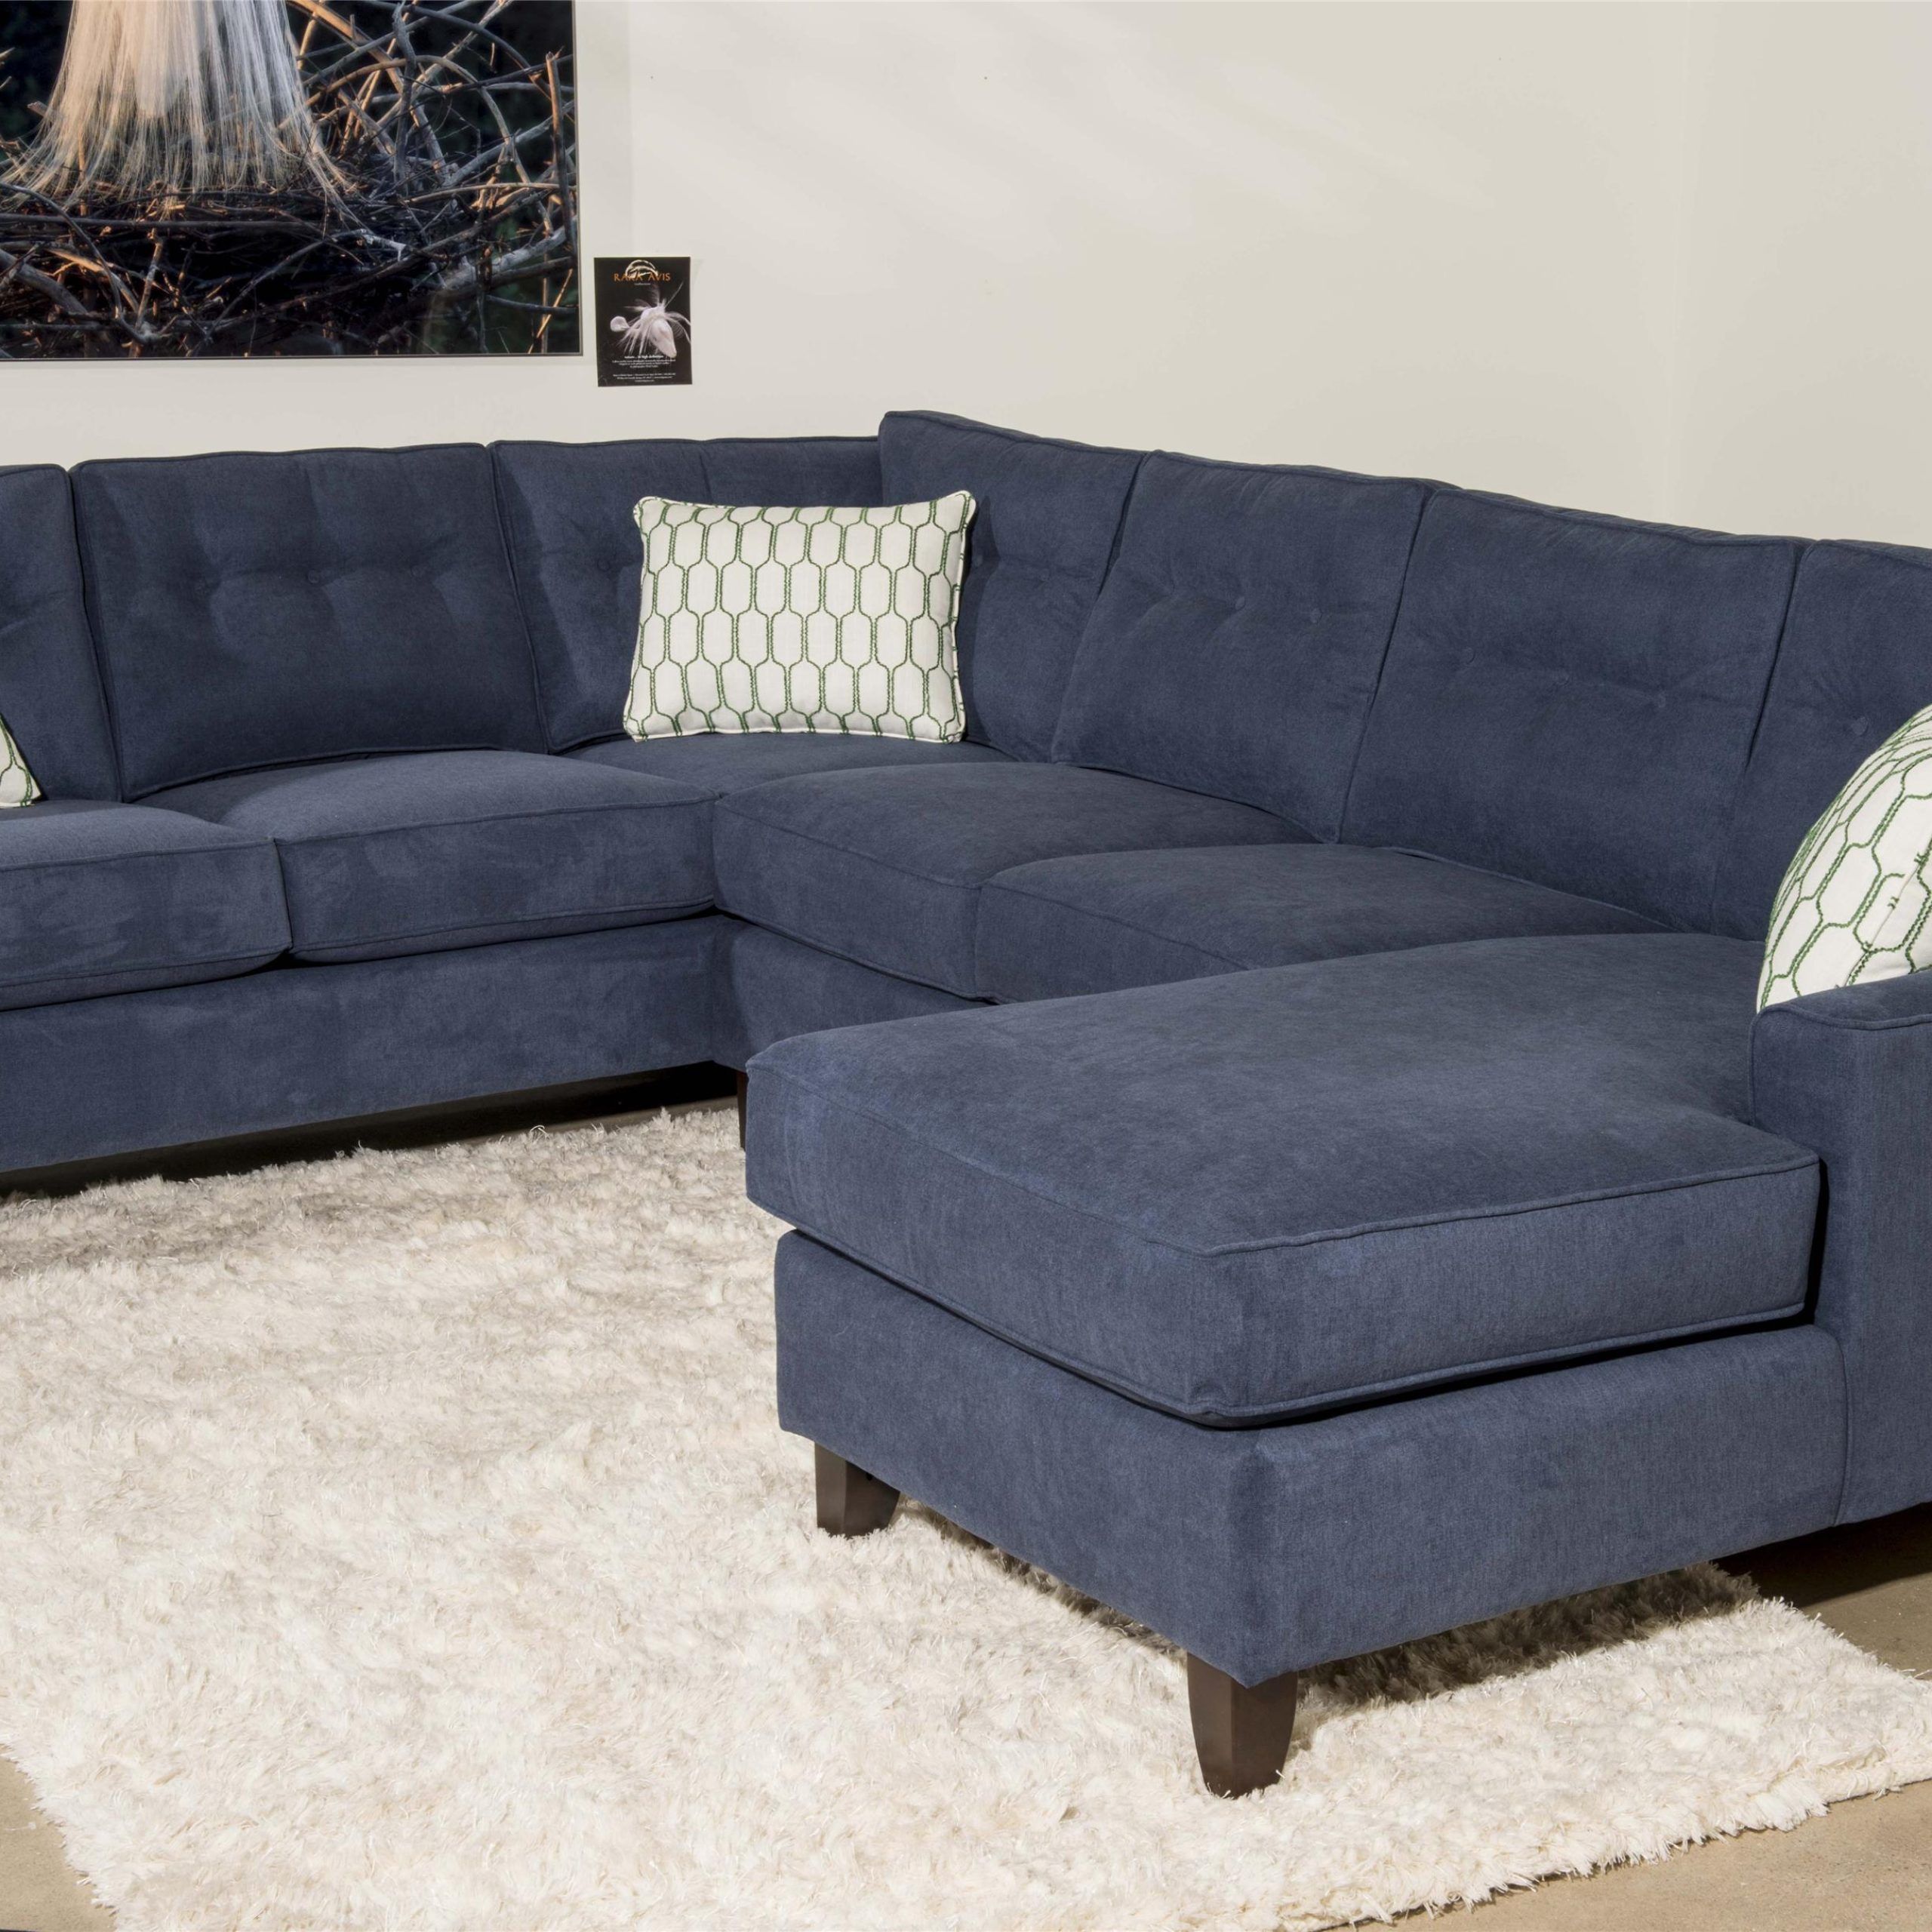 Audrina Contemporary 3 Piece Sectional Sofa With Chaiseklaussner Intended For 3 Piece Leather Sectional Sofa Sets (View 12 of 20)